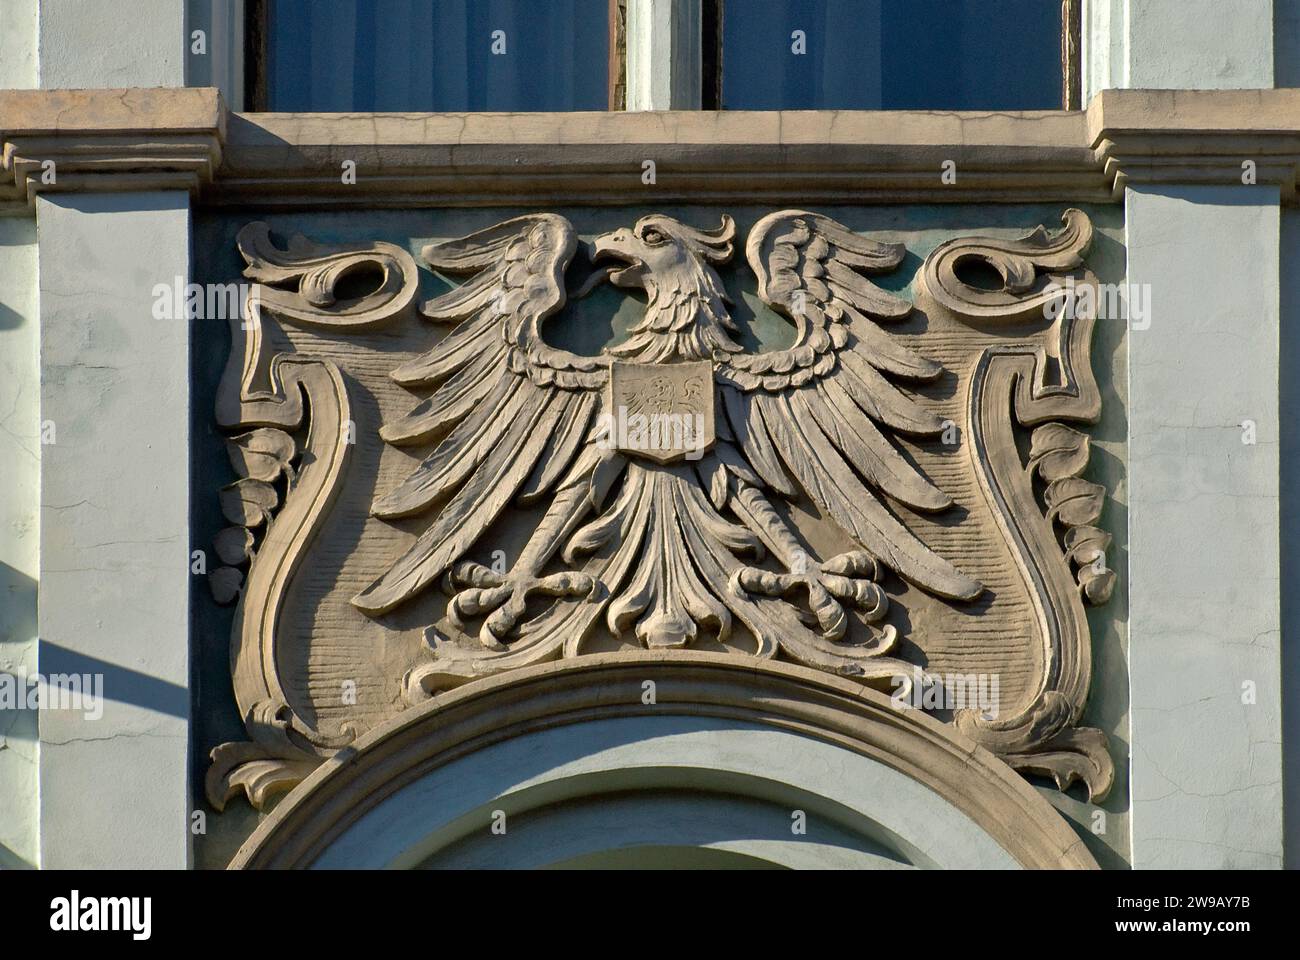 Carving of eagle at Art Nouveau building at Ruska Street in Wrocław, Lower Silesia region, Poland Stock Photo